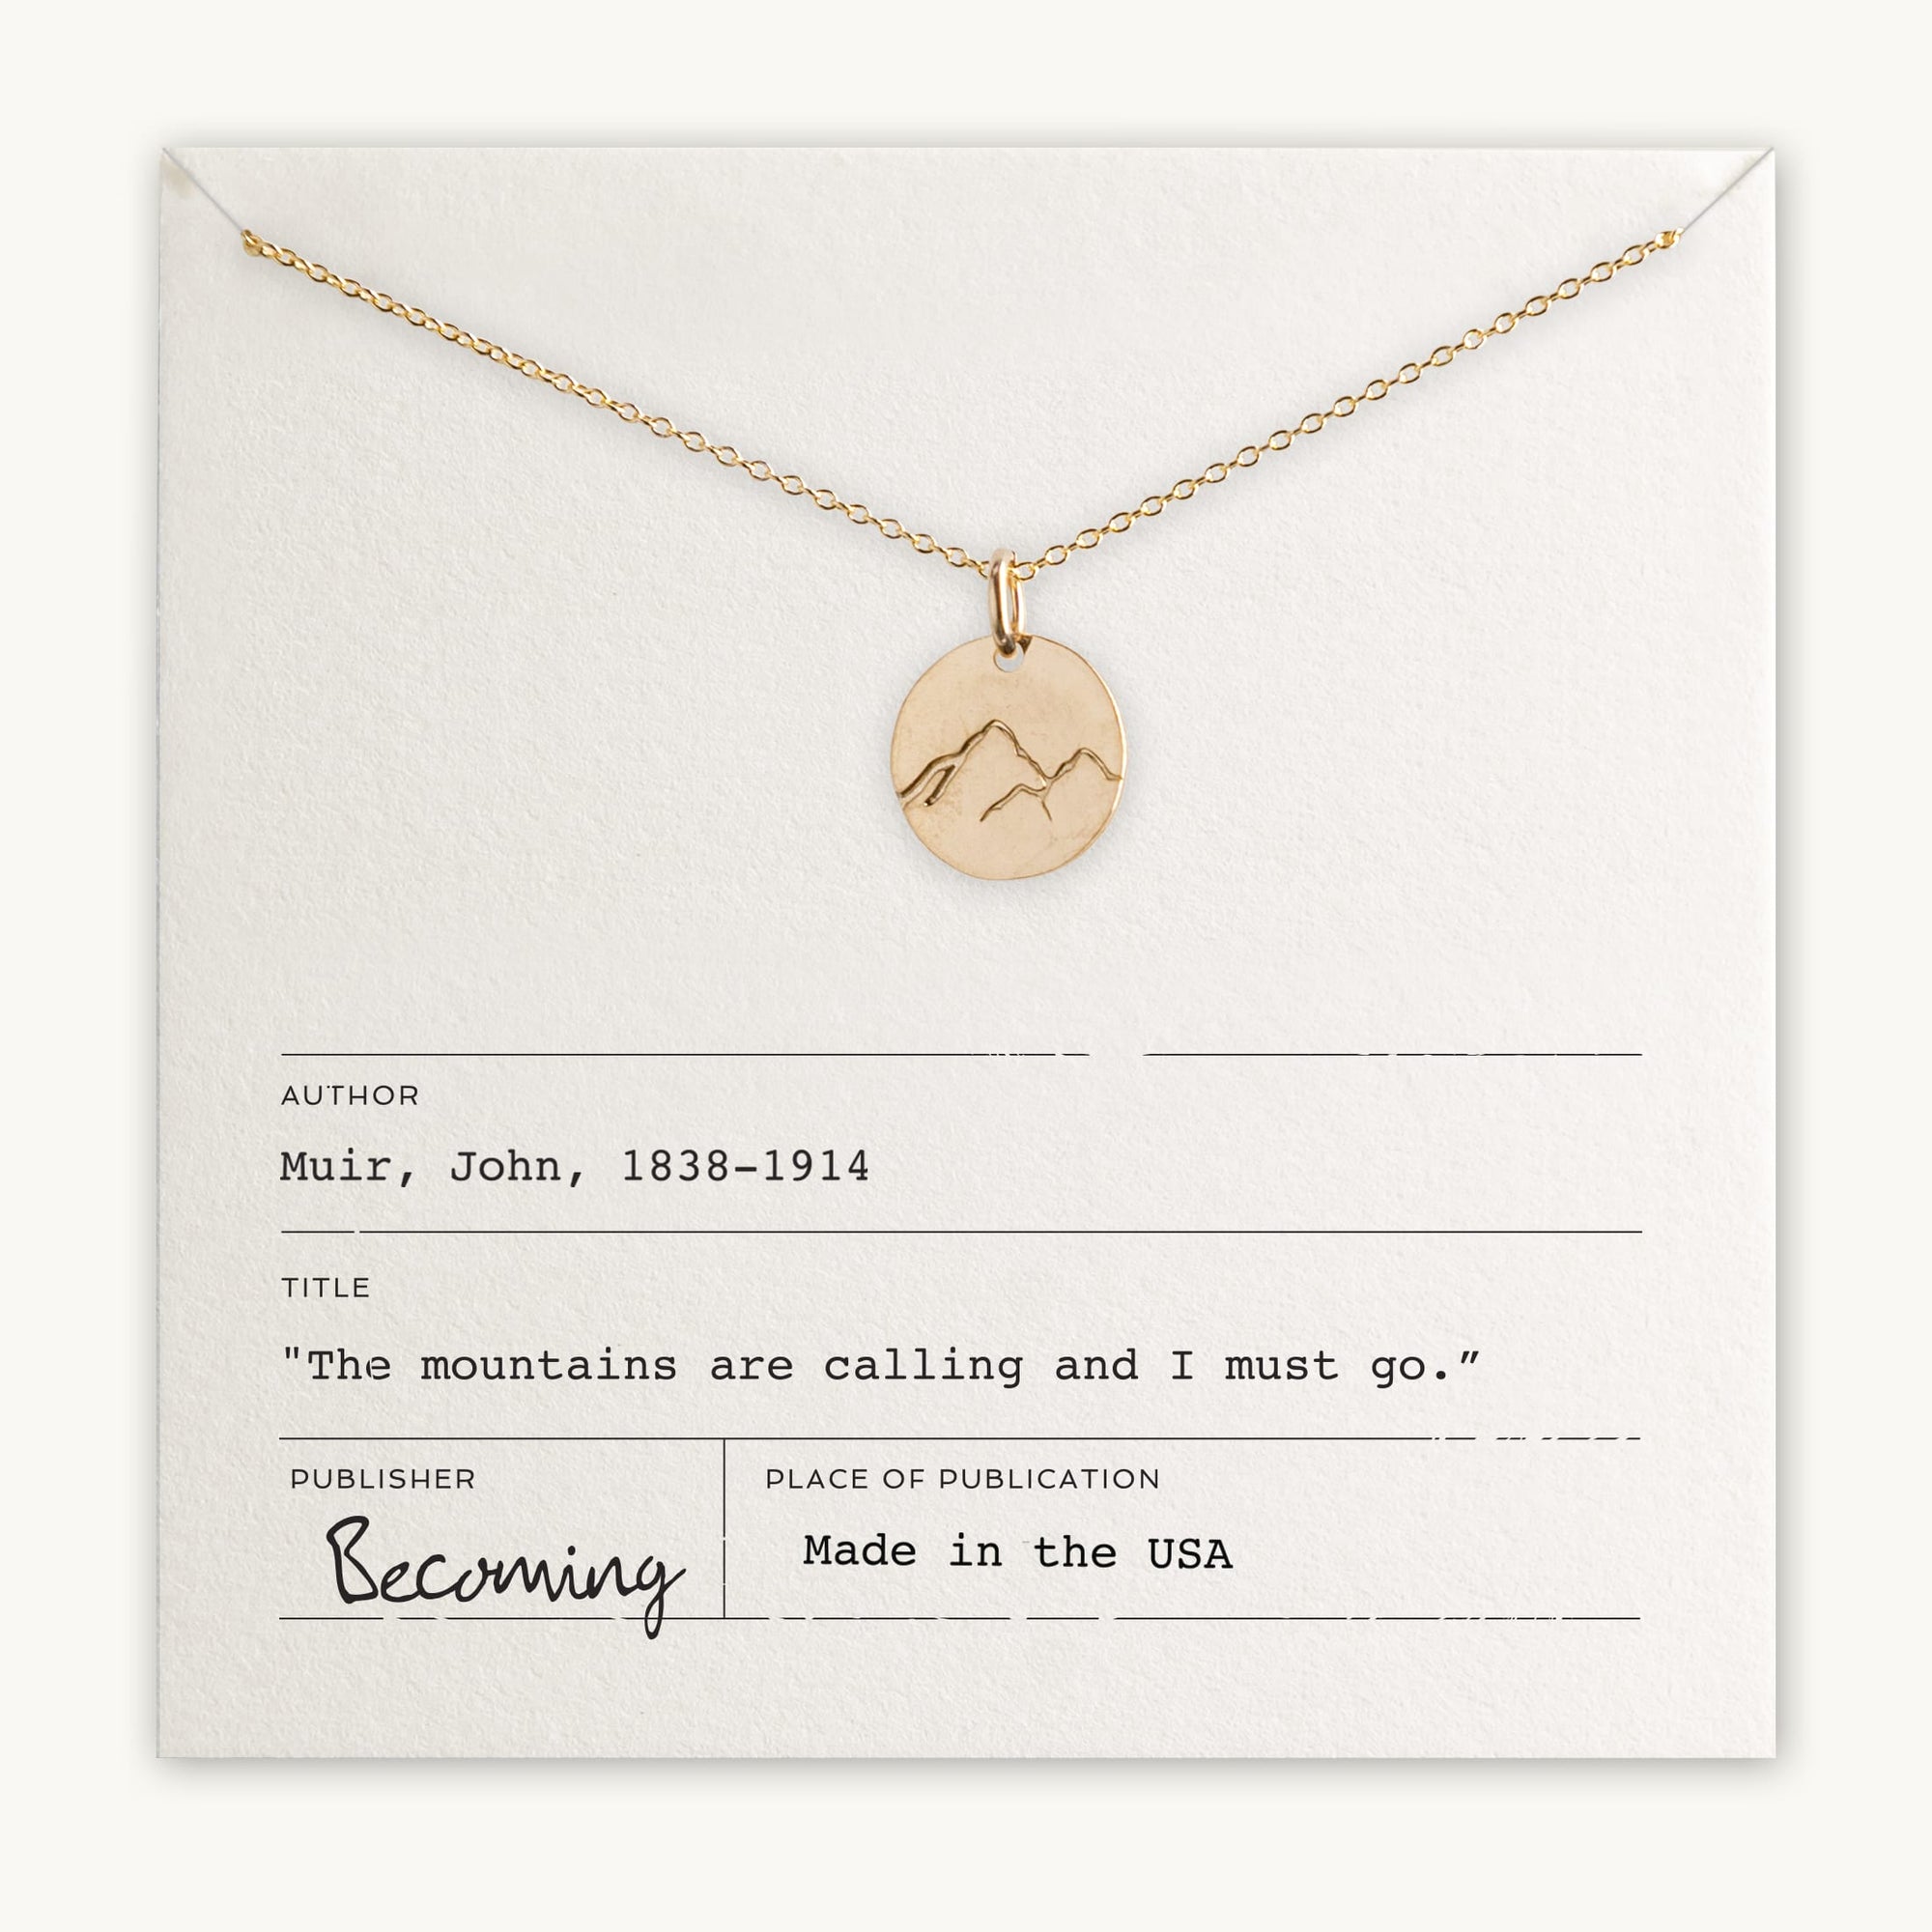 Becoming Jewelry&#39;s Mountains Are Calling Necklace pendant necklace with mountain charm displayed on a card with bibliographic-style information, including a quote, &quot;the mountains are calling and I must go.